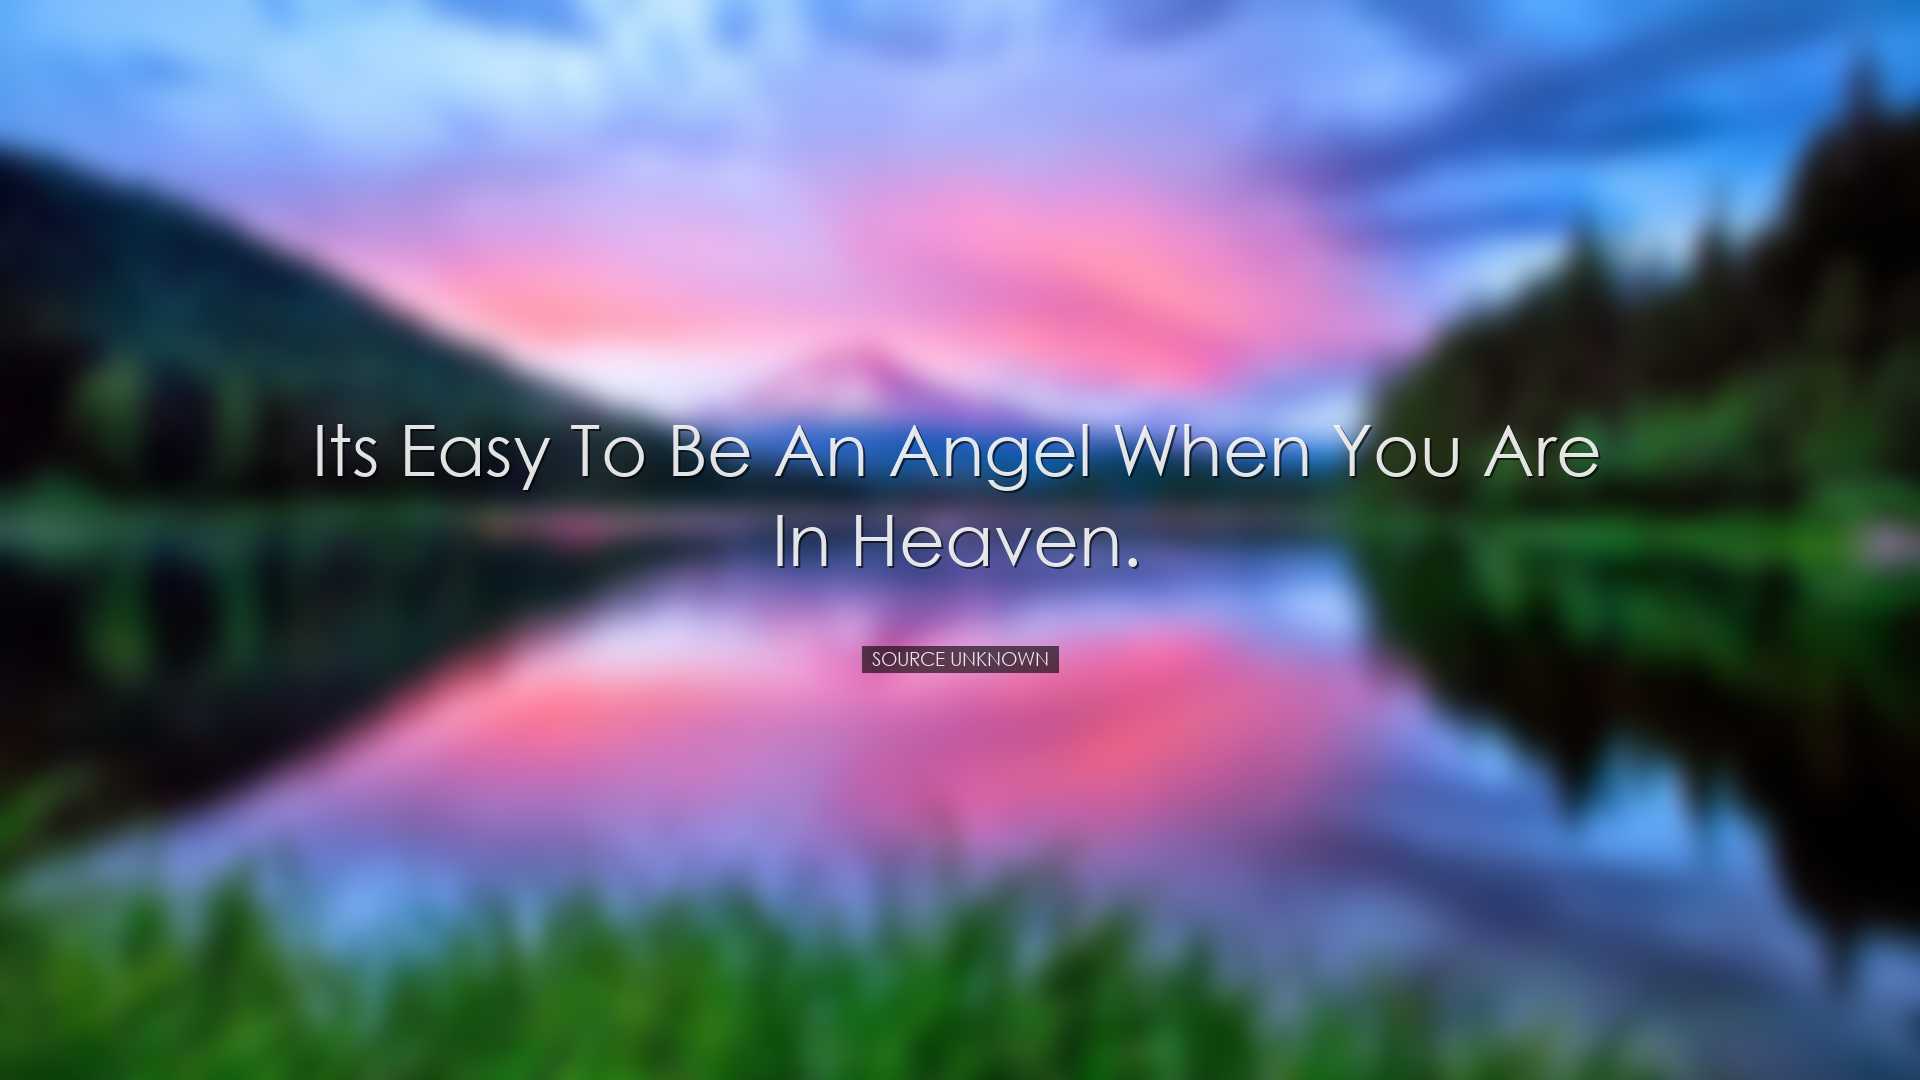 Its easy to be an angel when you are in heaven. - Source Unknown